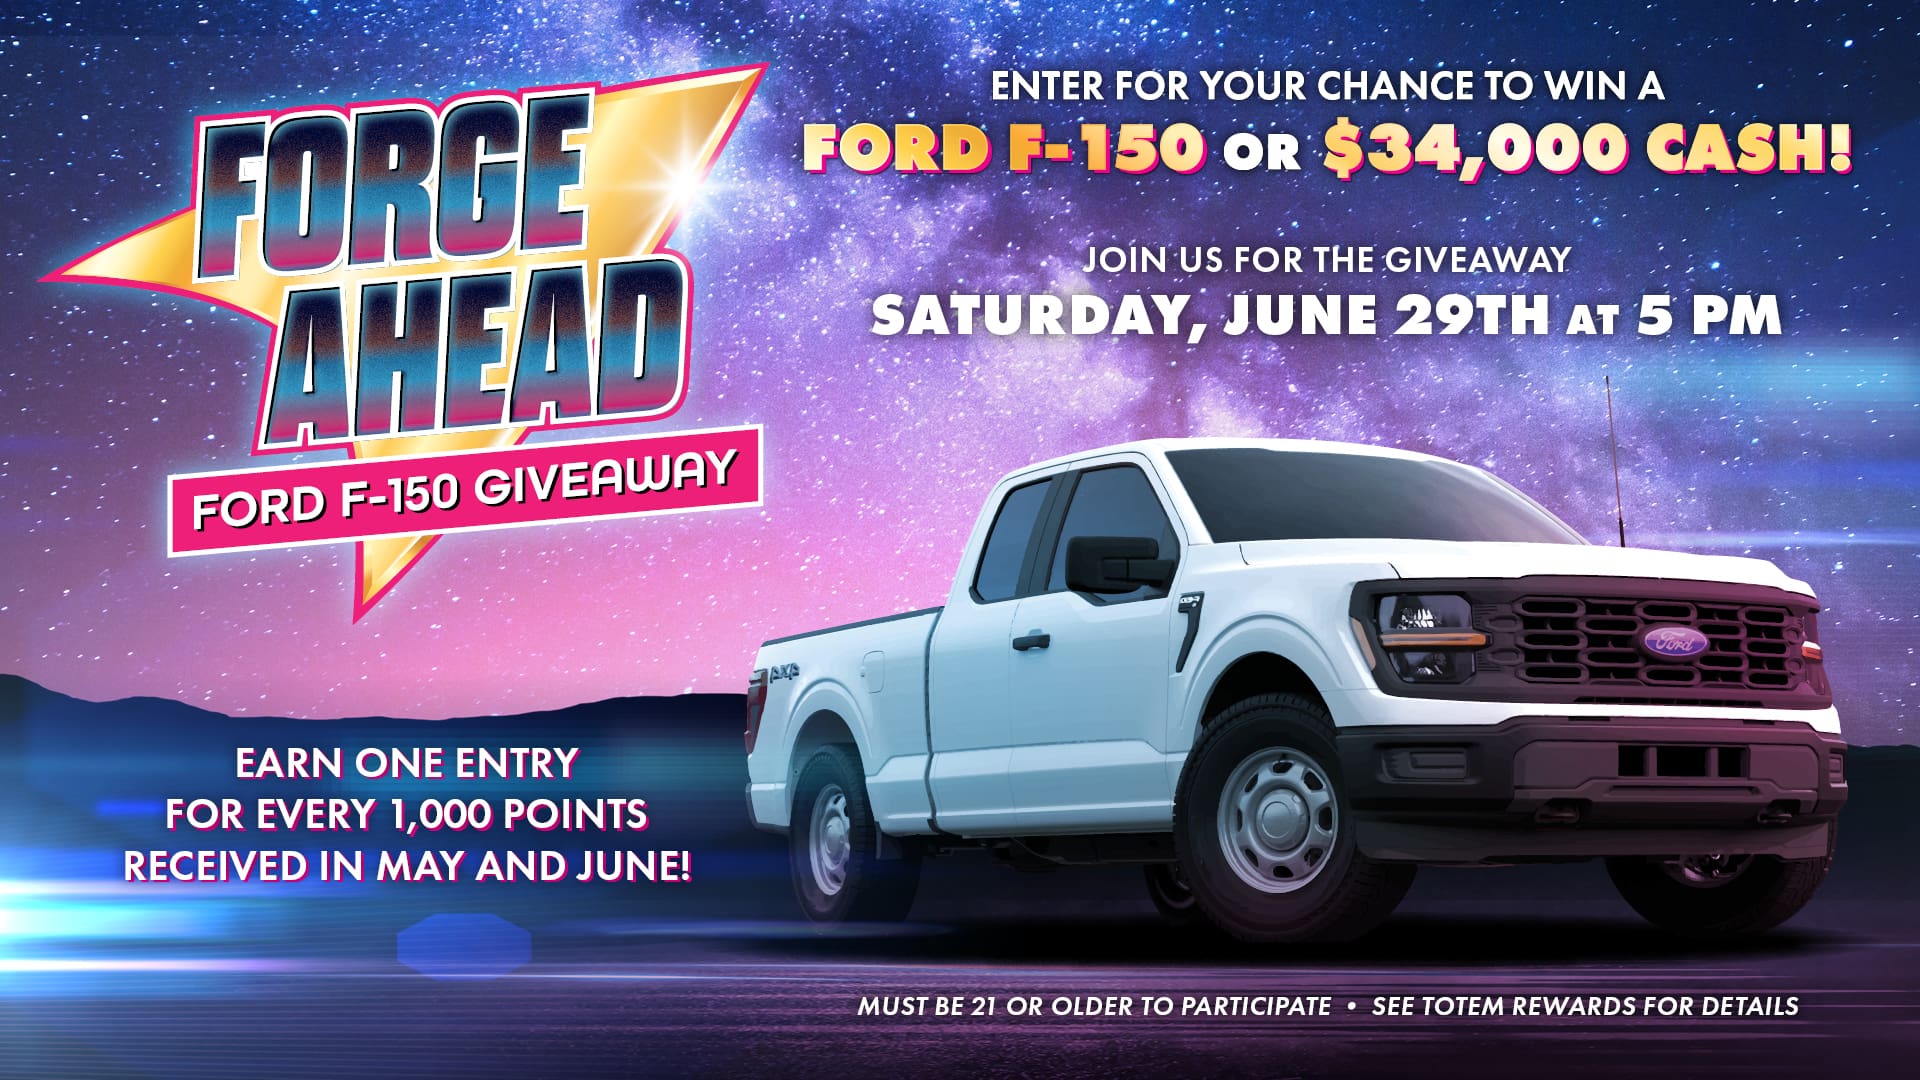 Forge Ahead Ford F-150 Giveaway